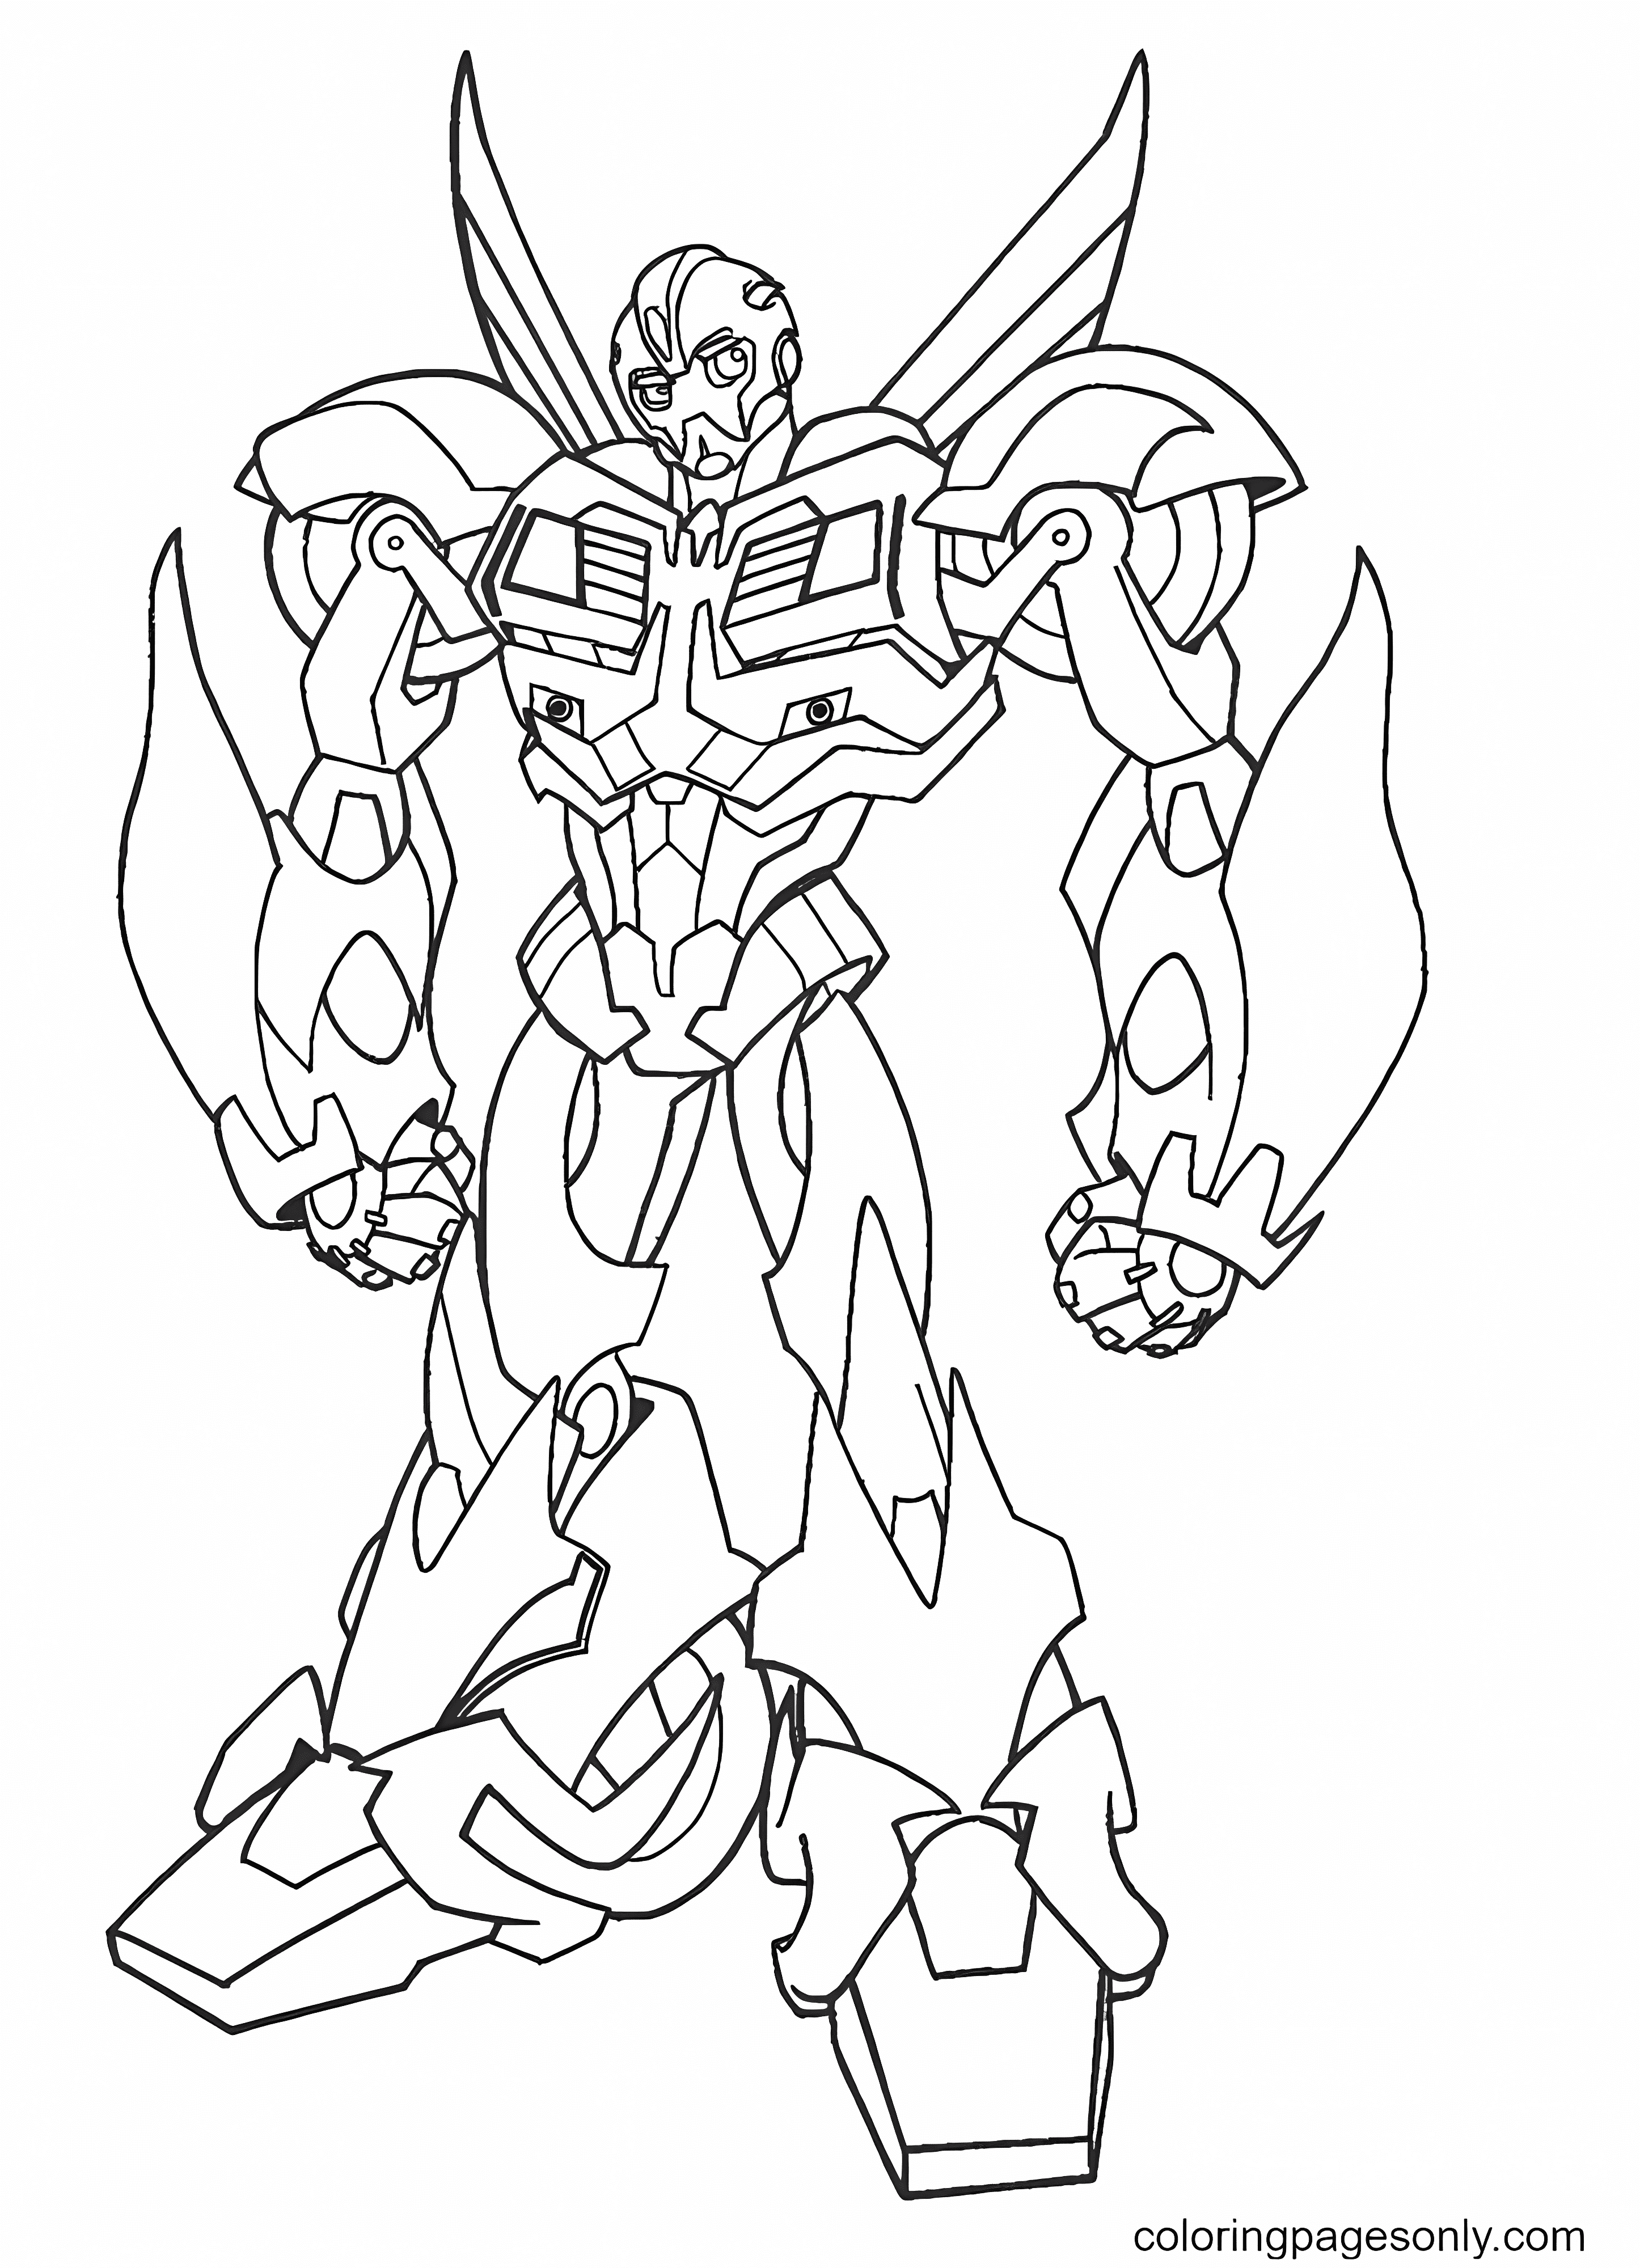 Fight of Transformers Robots Coloring Pages